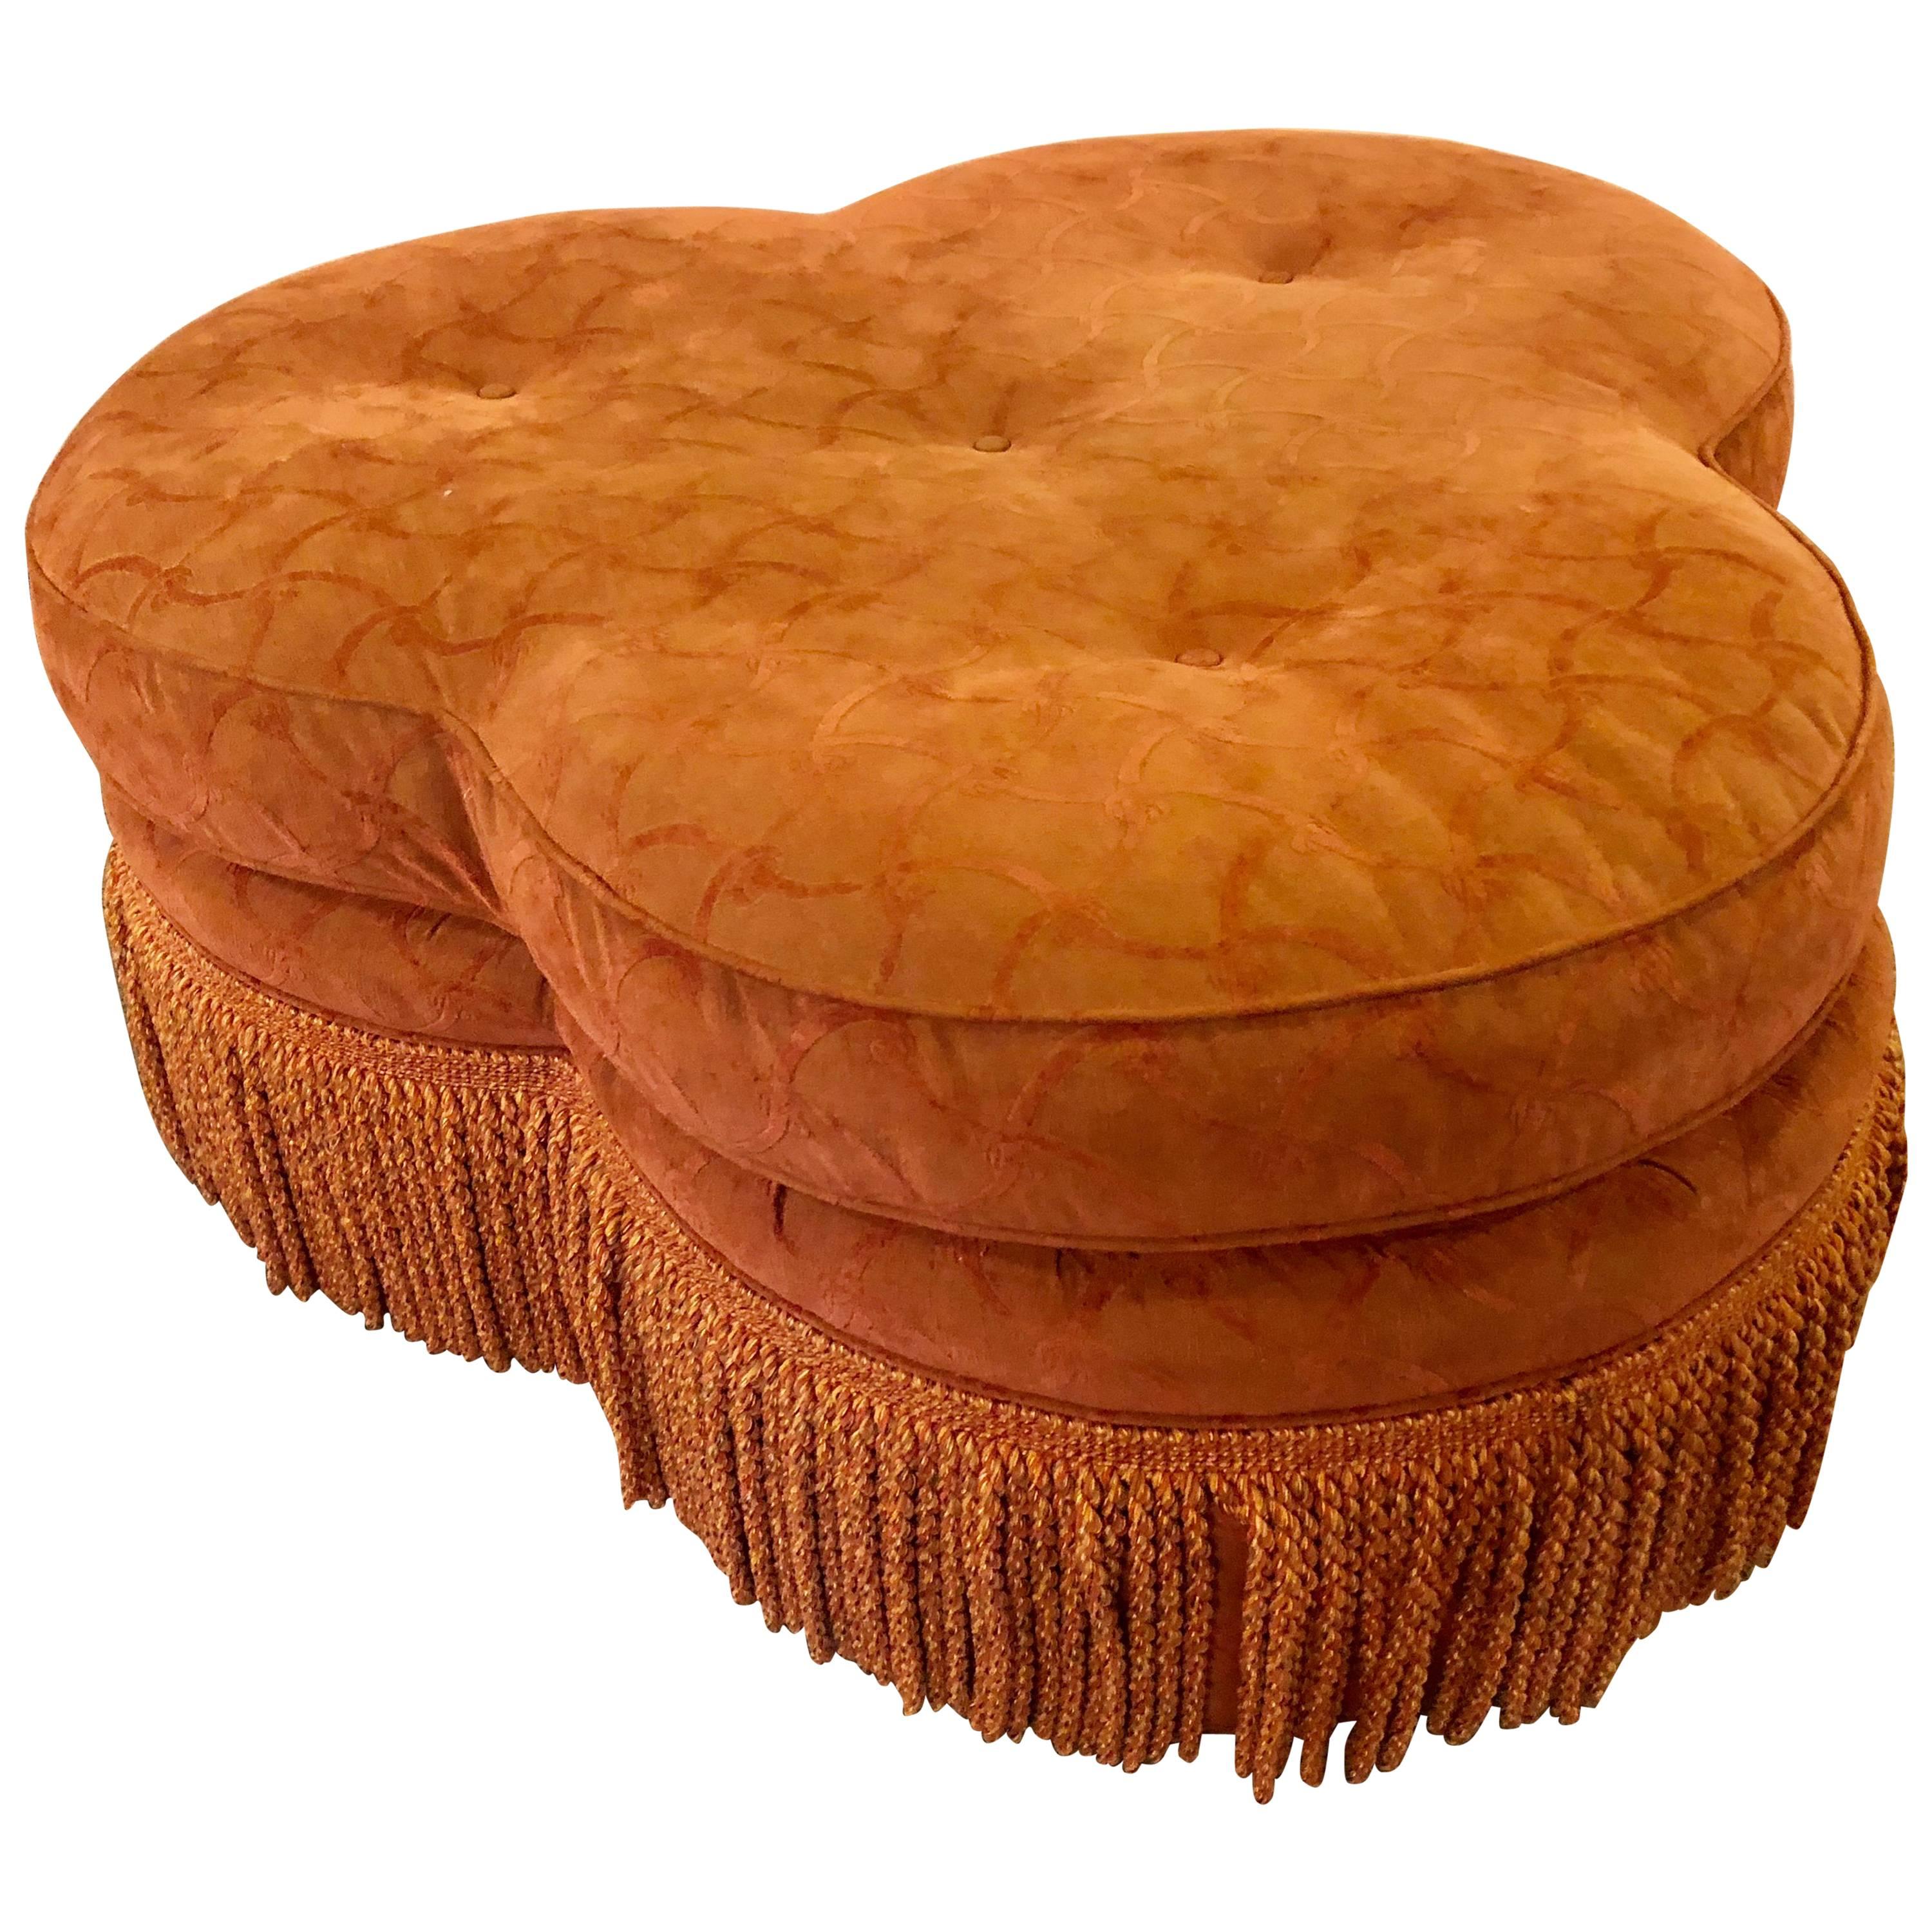 Hollywood Regency Style Large Clover Shaped Tufted Ottoman or Stool